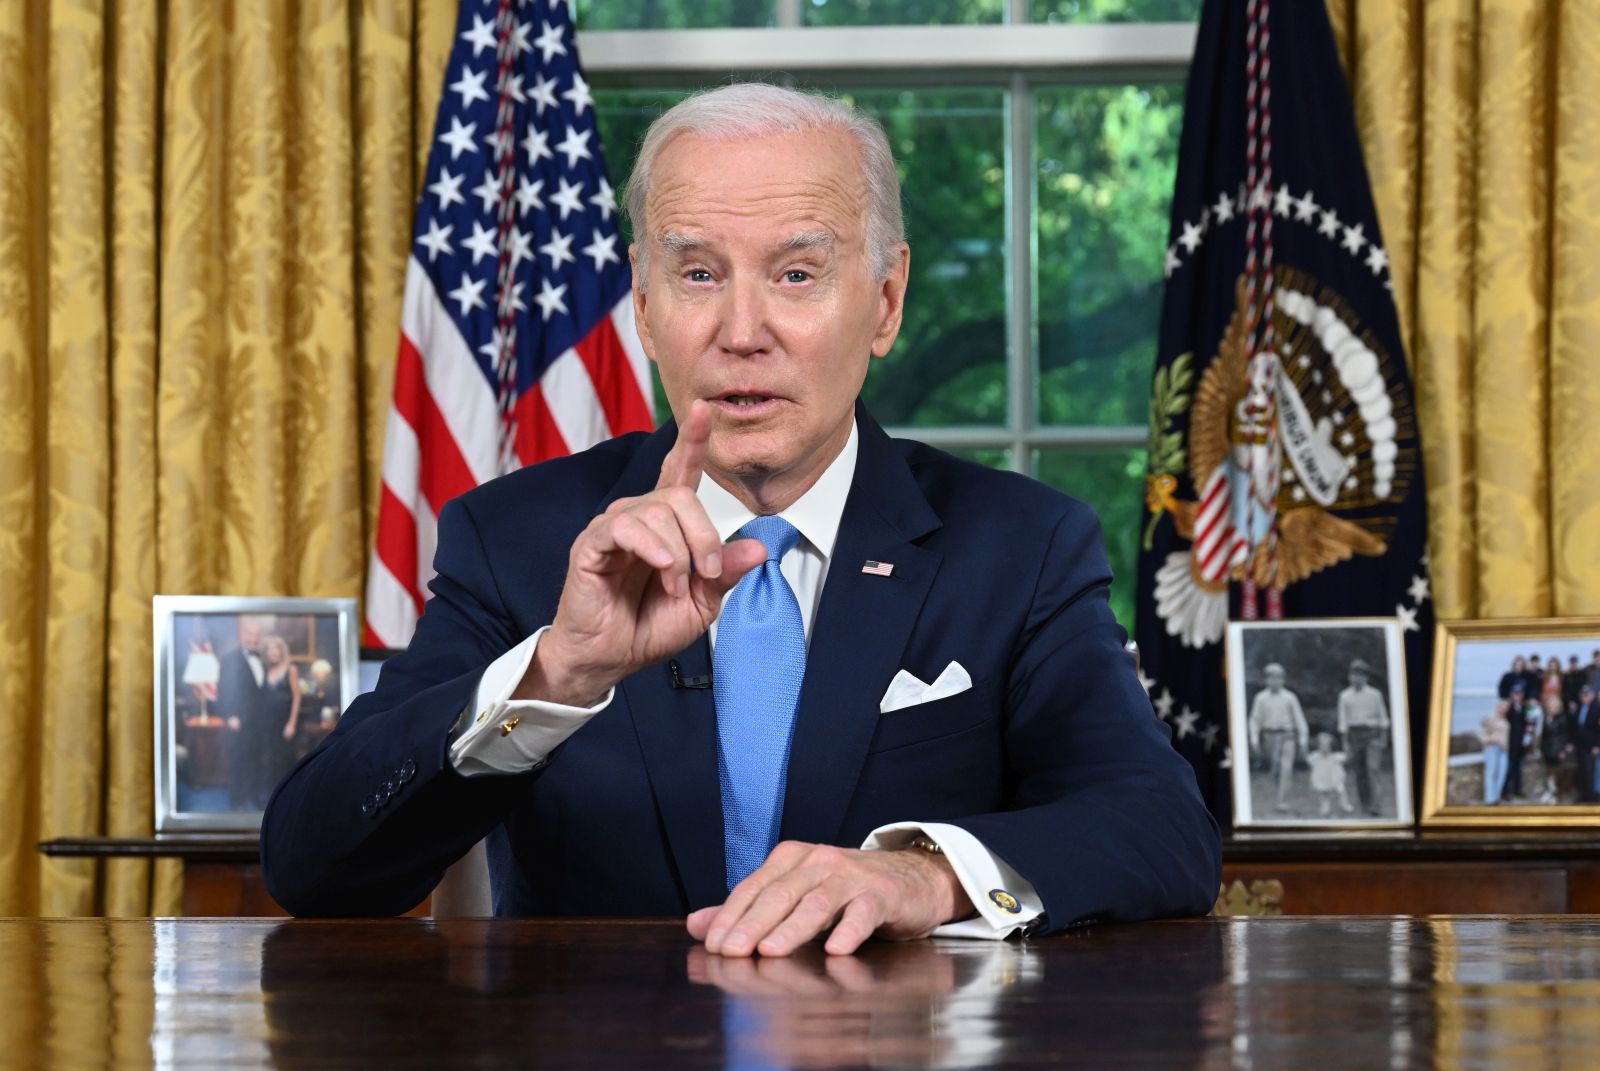 epa10669759 US President Joe Biden addresses the nation on averting default and the Bipartisan Budget Agreement, in the Oval Office of the White House in Washington, DC, USA, 02 June 2023. The Fiscal Responsibility Act of 2023 (FRA) (H.R. 3746), will suspend the US debt ceiling through 01 January 2025, and will avert a first-ever default by the US government.  EPA/JIM WATSON / POOL